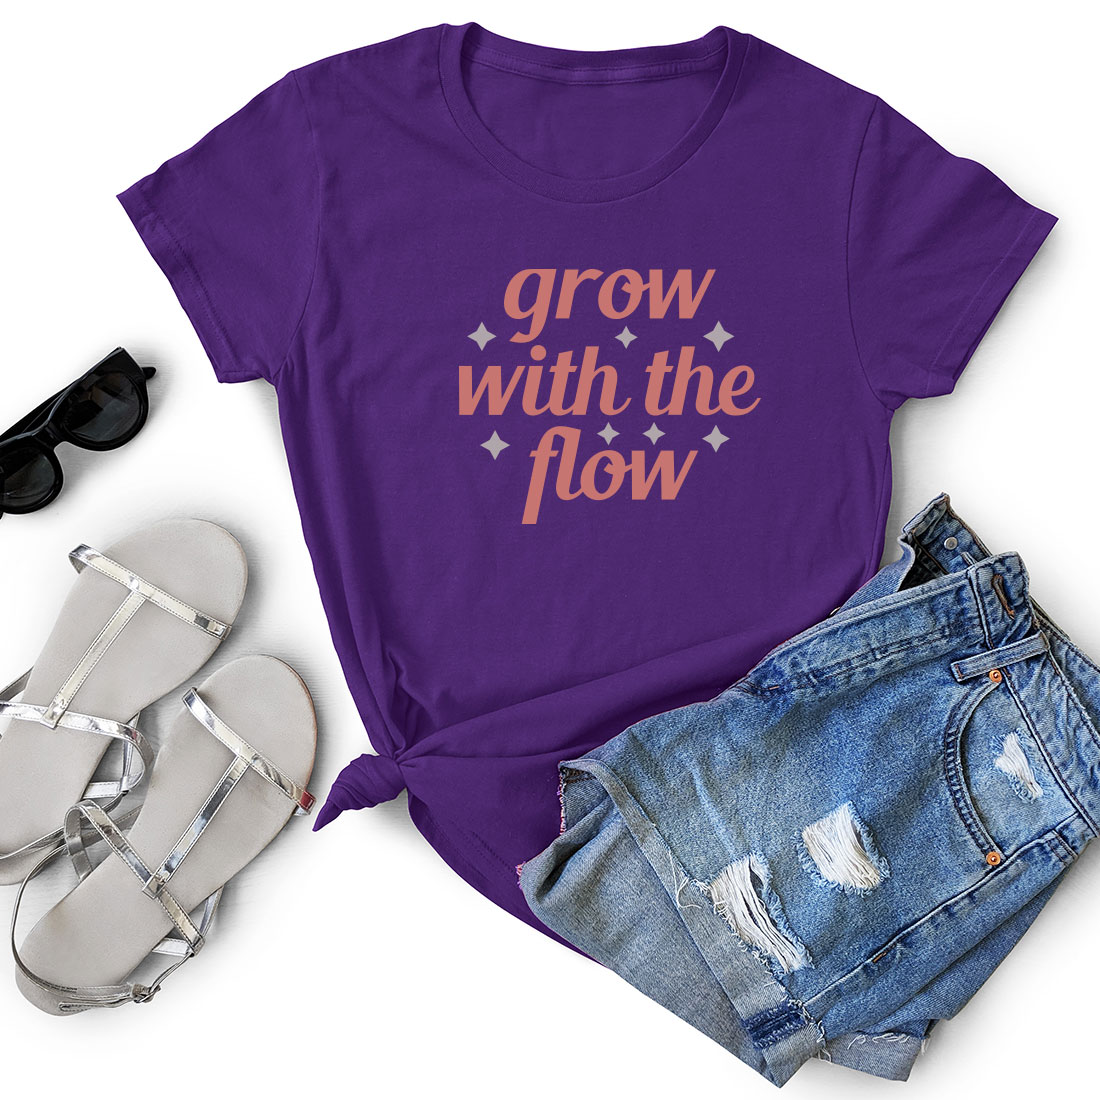 T - shirt that says grow with the flow next to a pair of shorts.